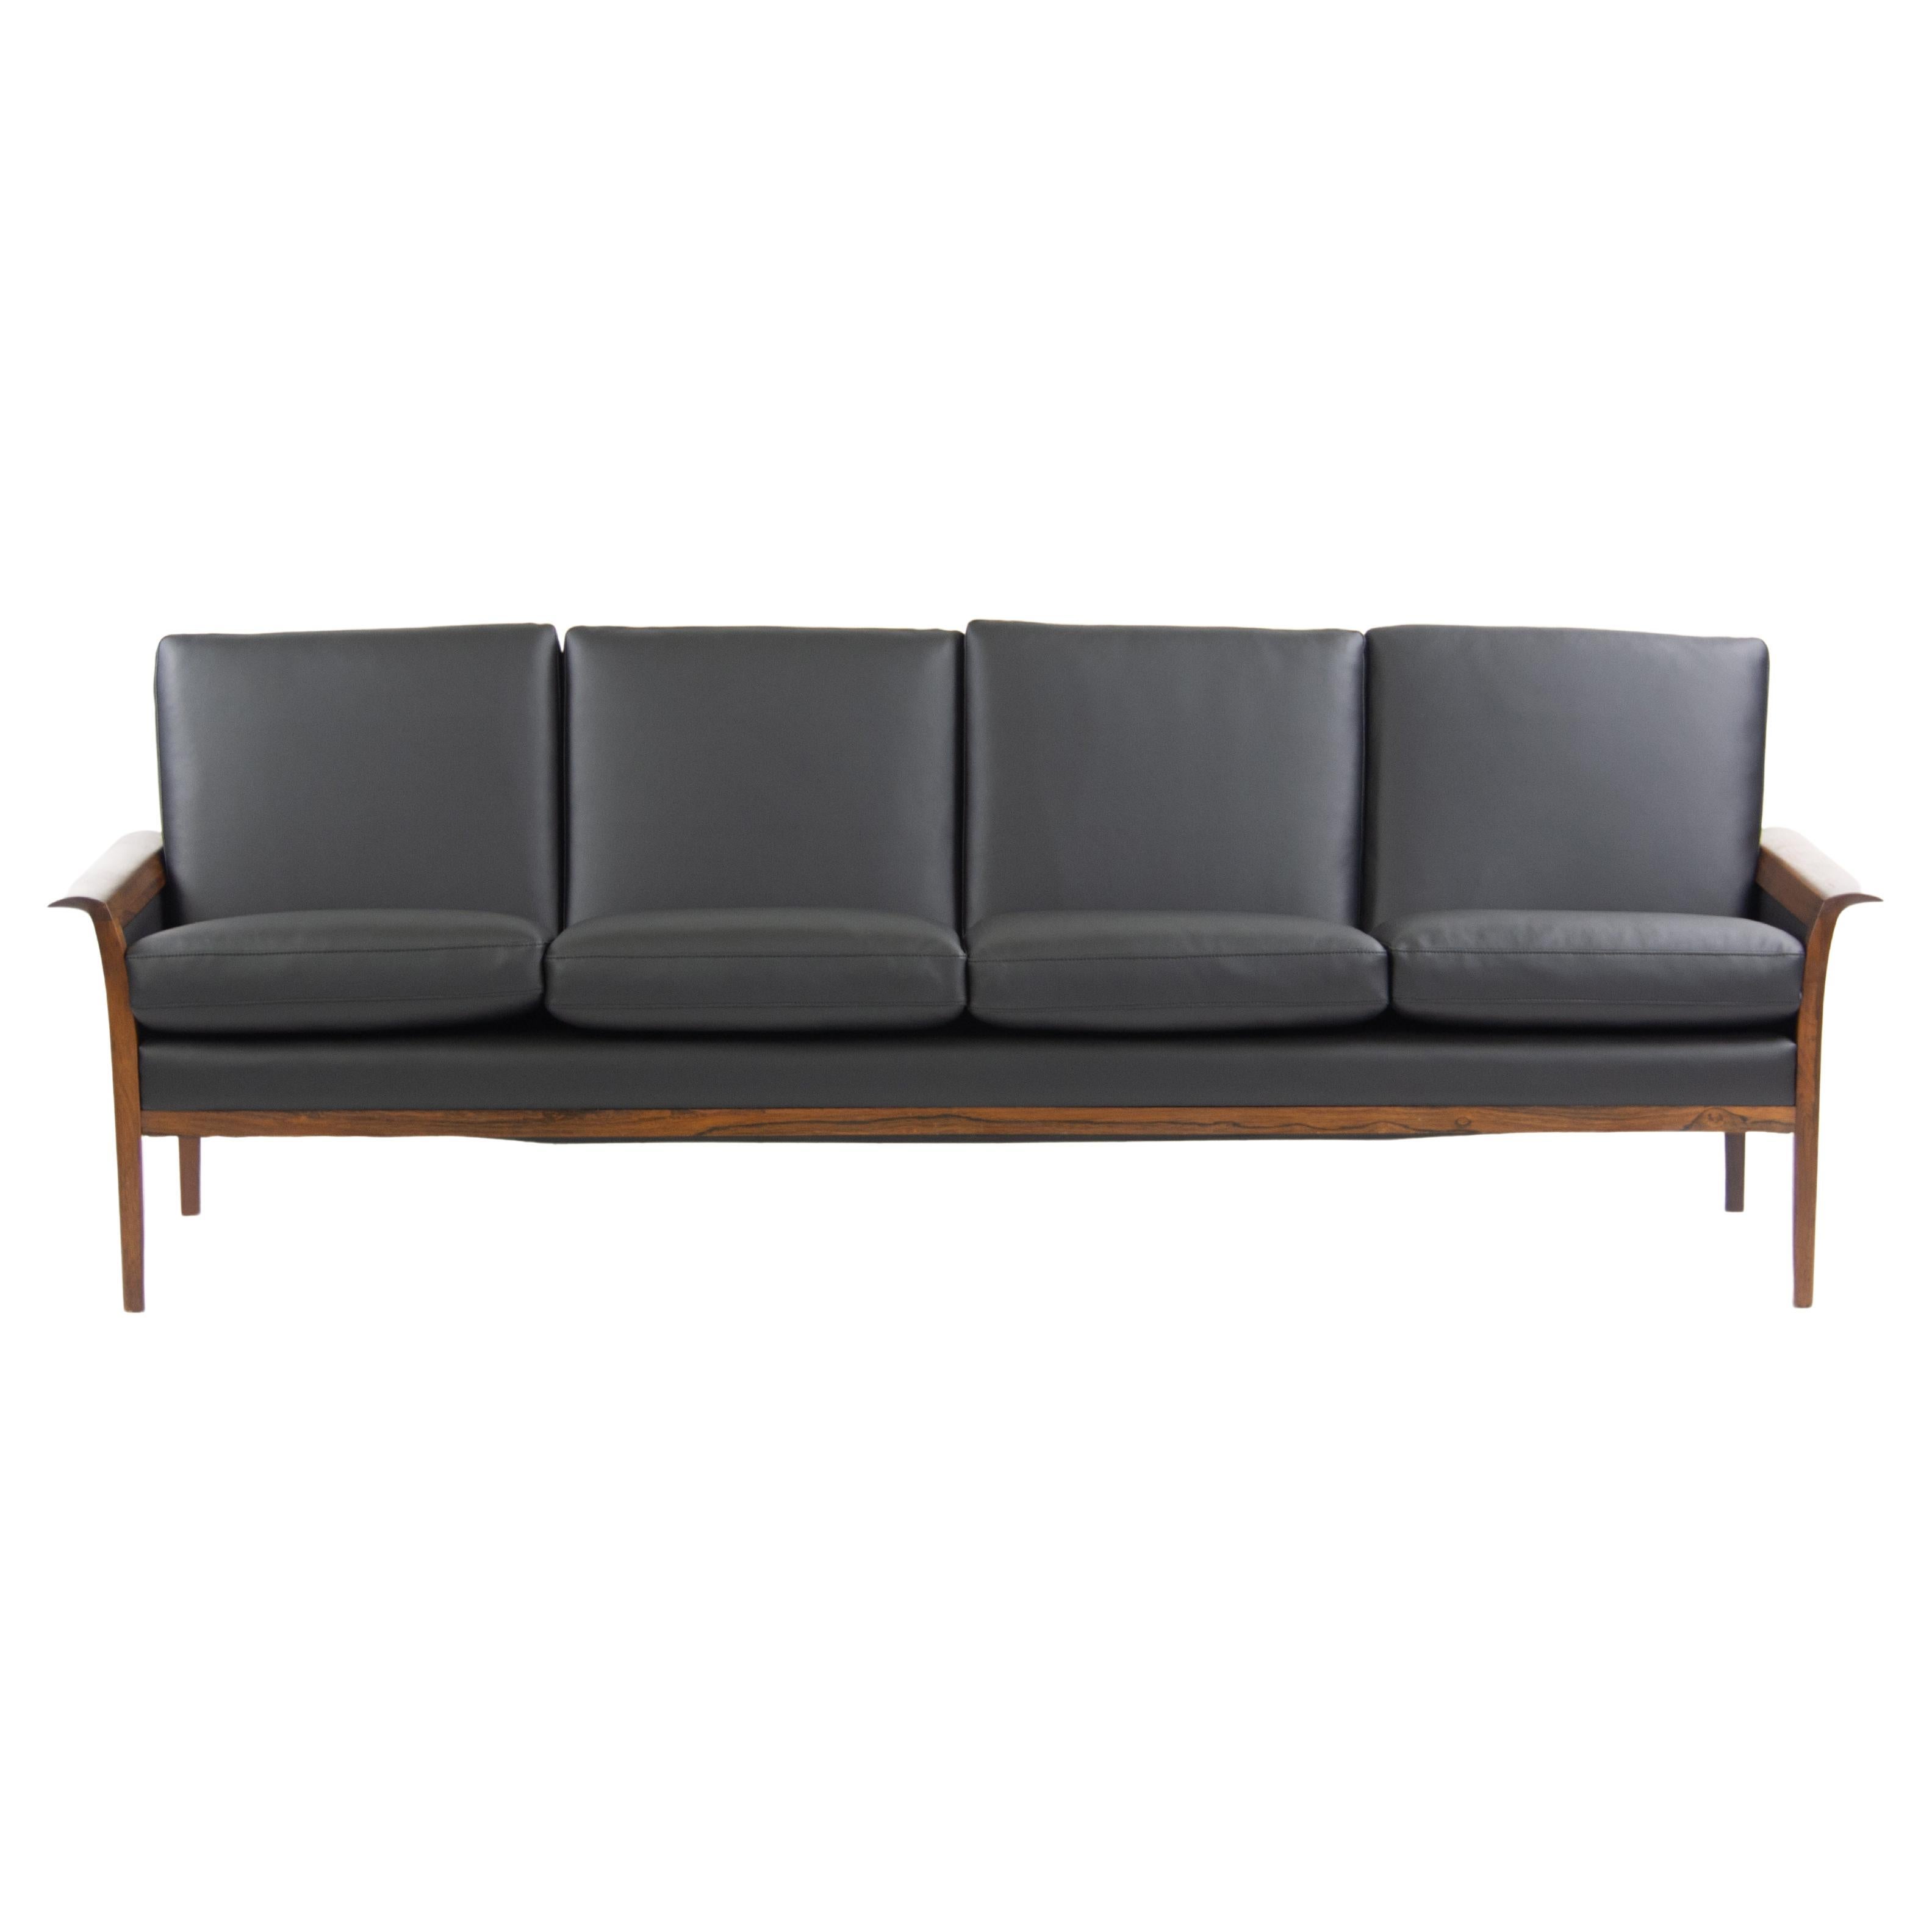 1960's Knut Saeter Rosewood Sofa for Vatne Mobler Norway New Black Upholstery For Sale